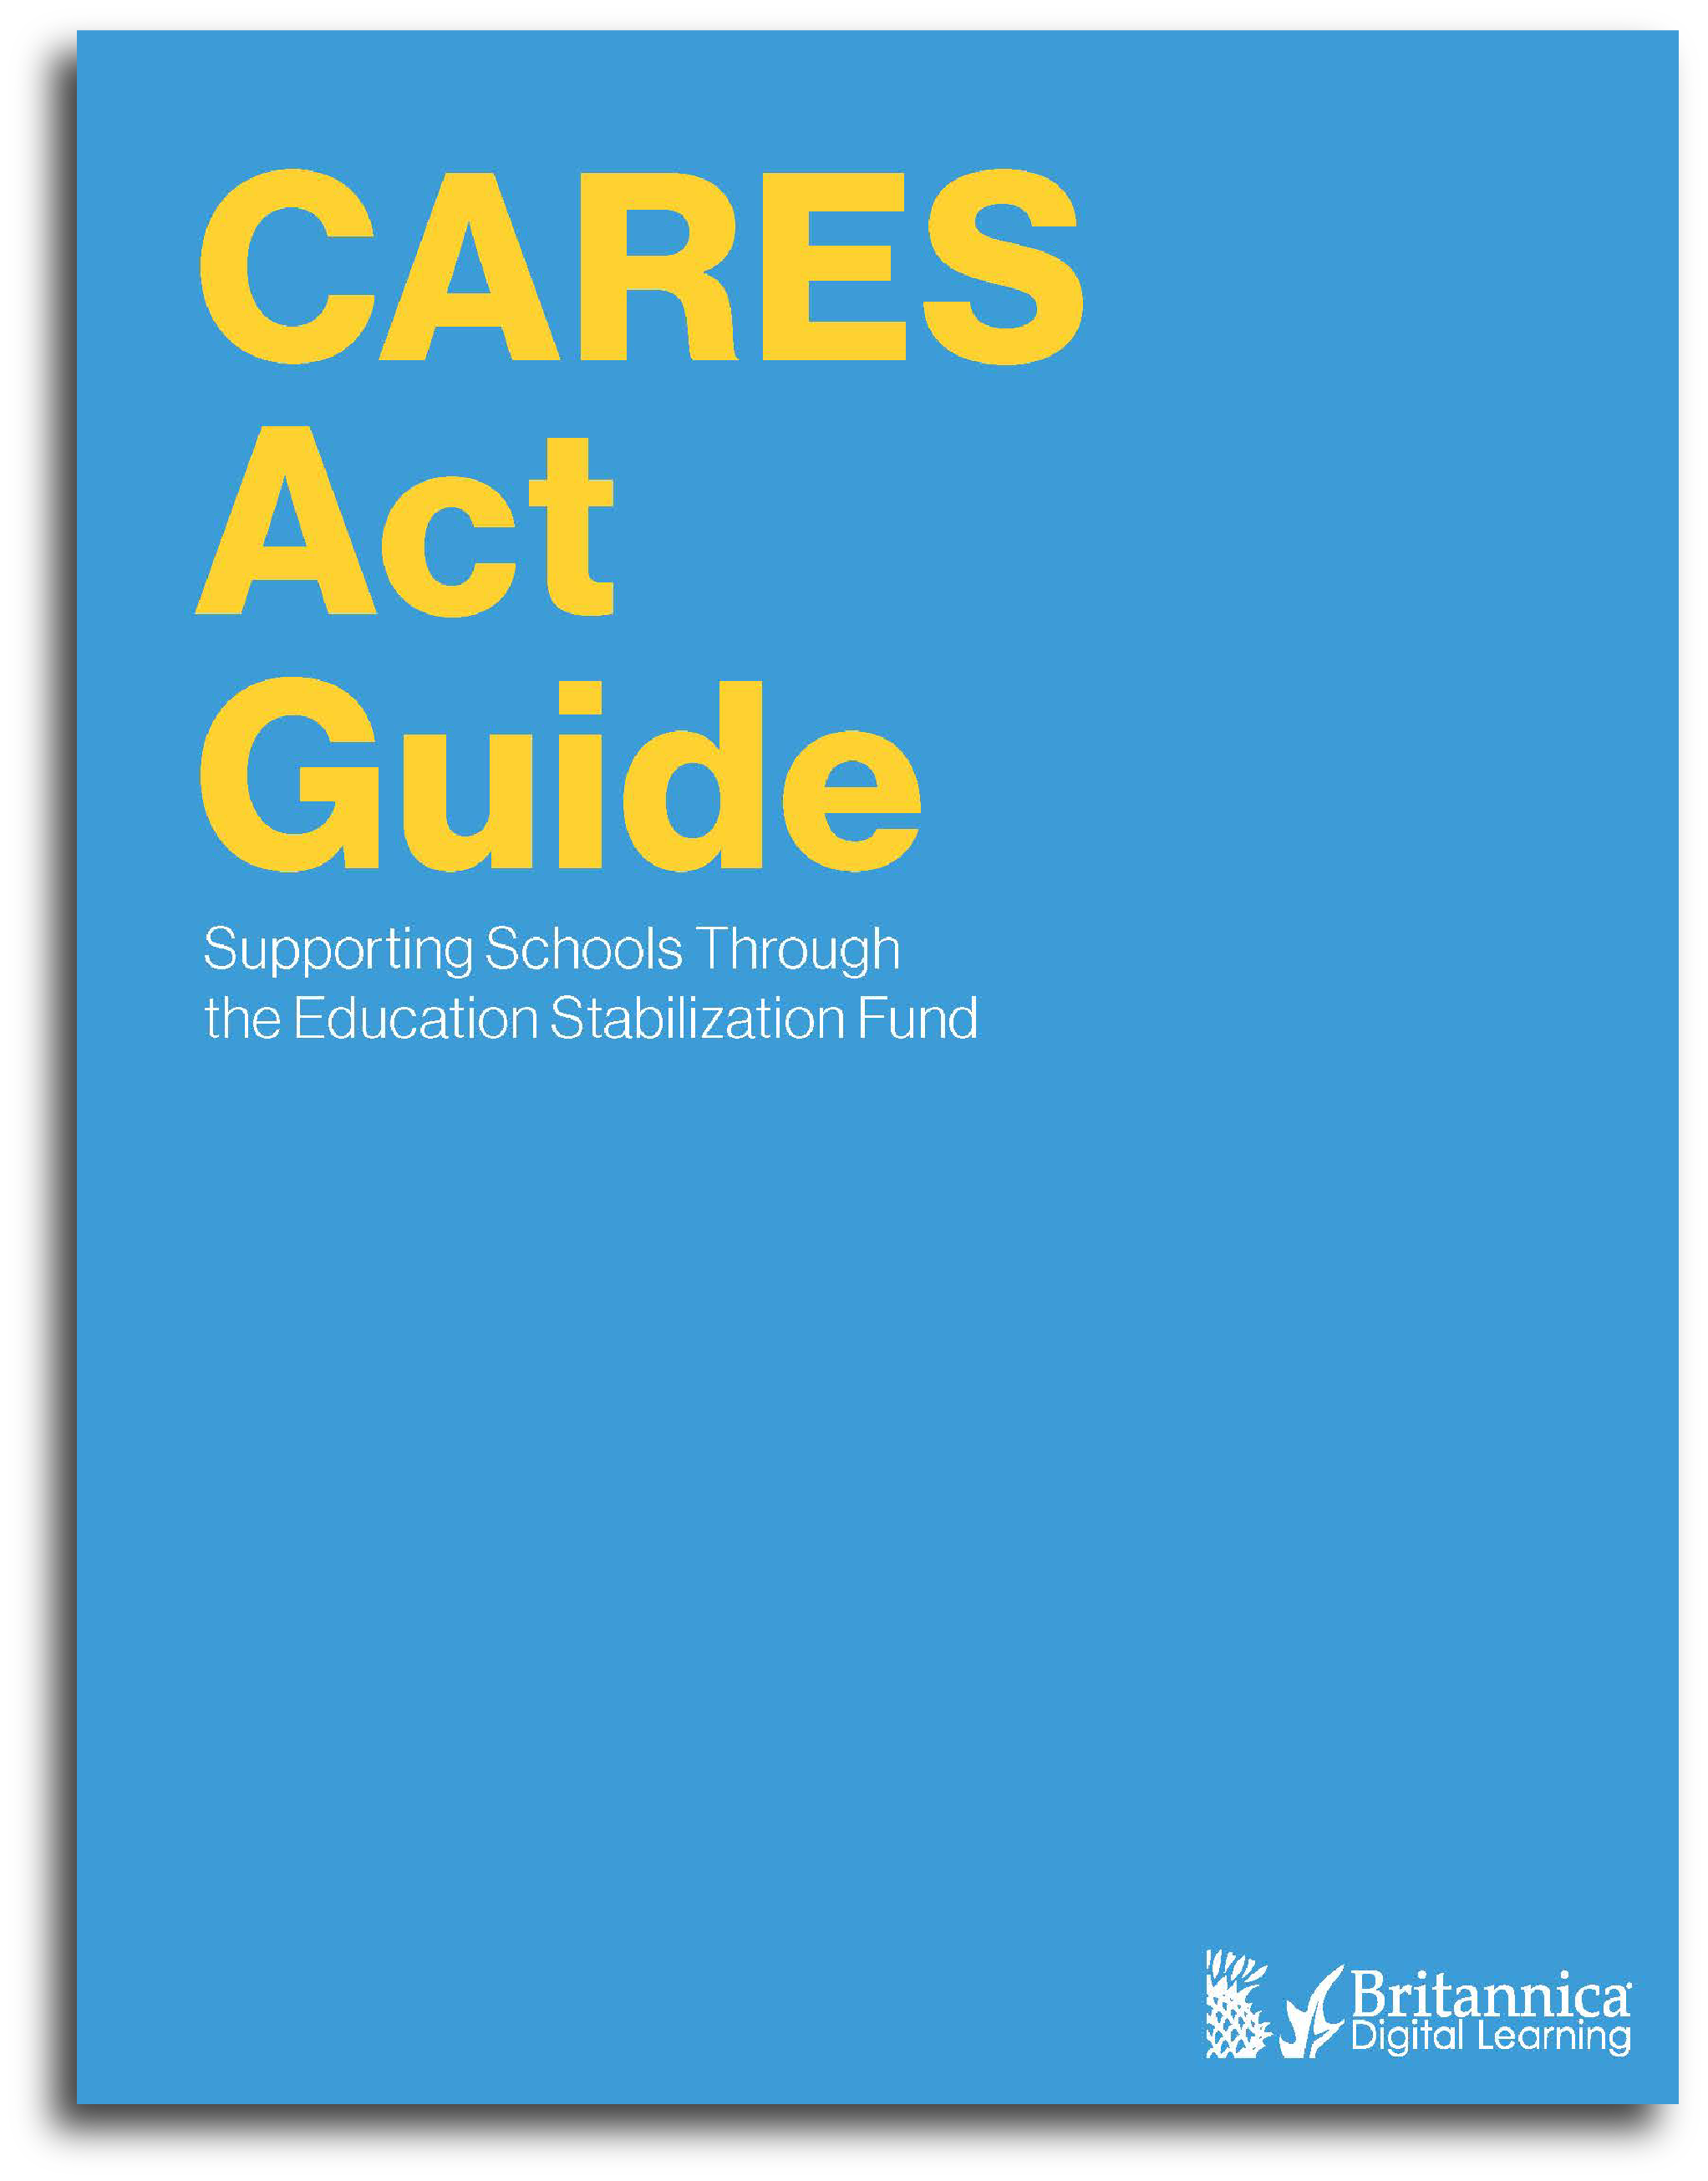 Britannica's Guide to the CARES Act